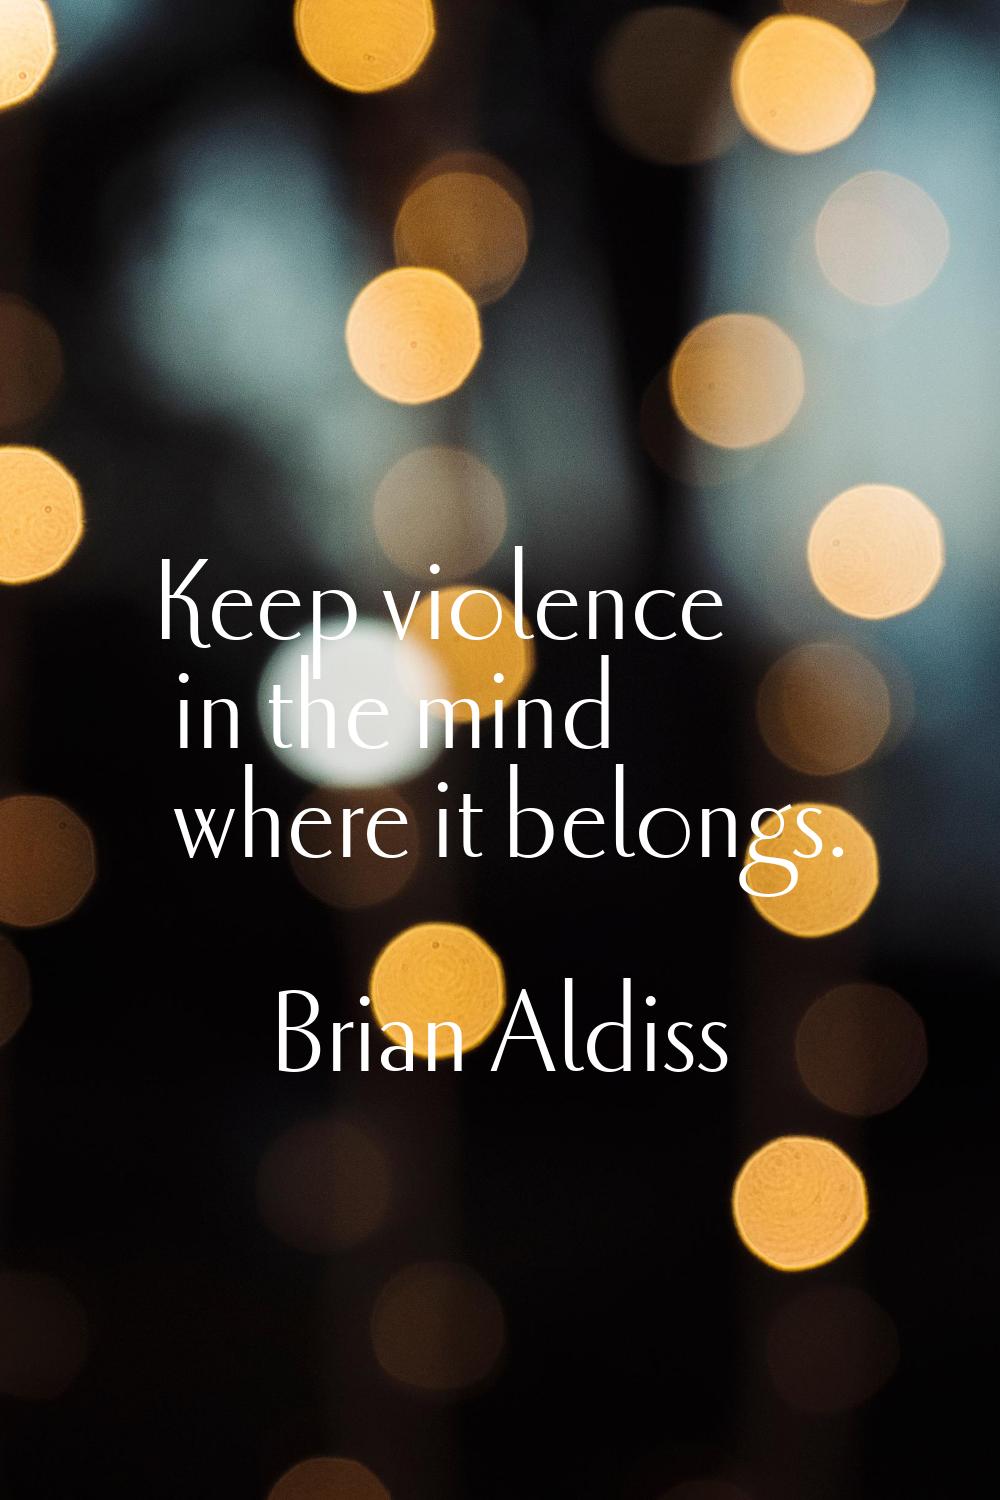 Keep violence in the mind where it belongs.